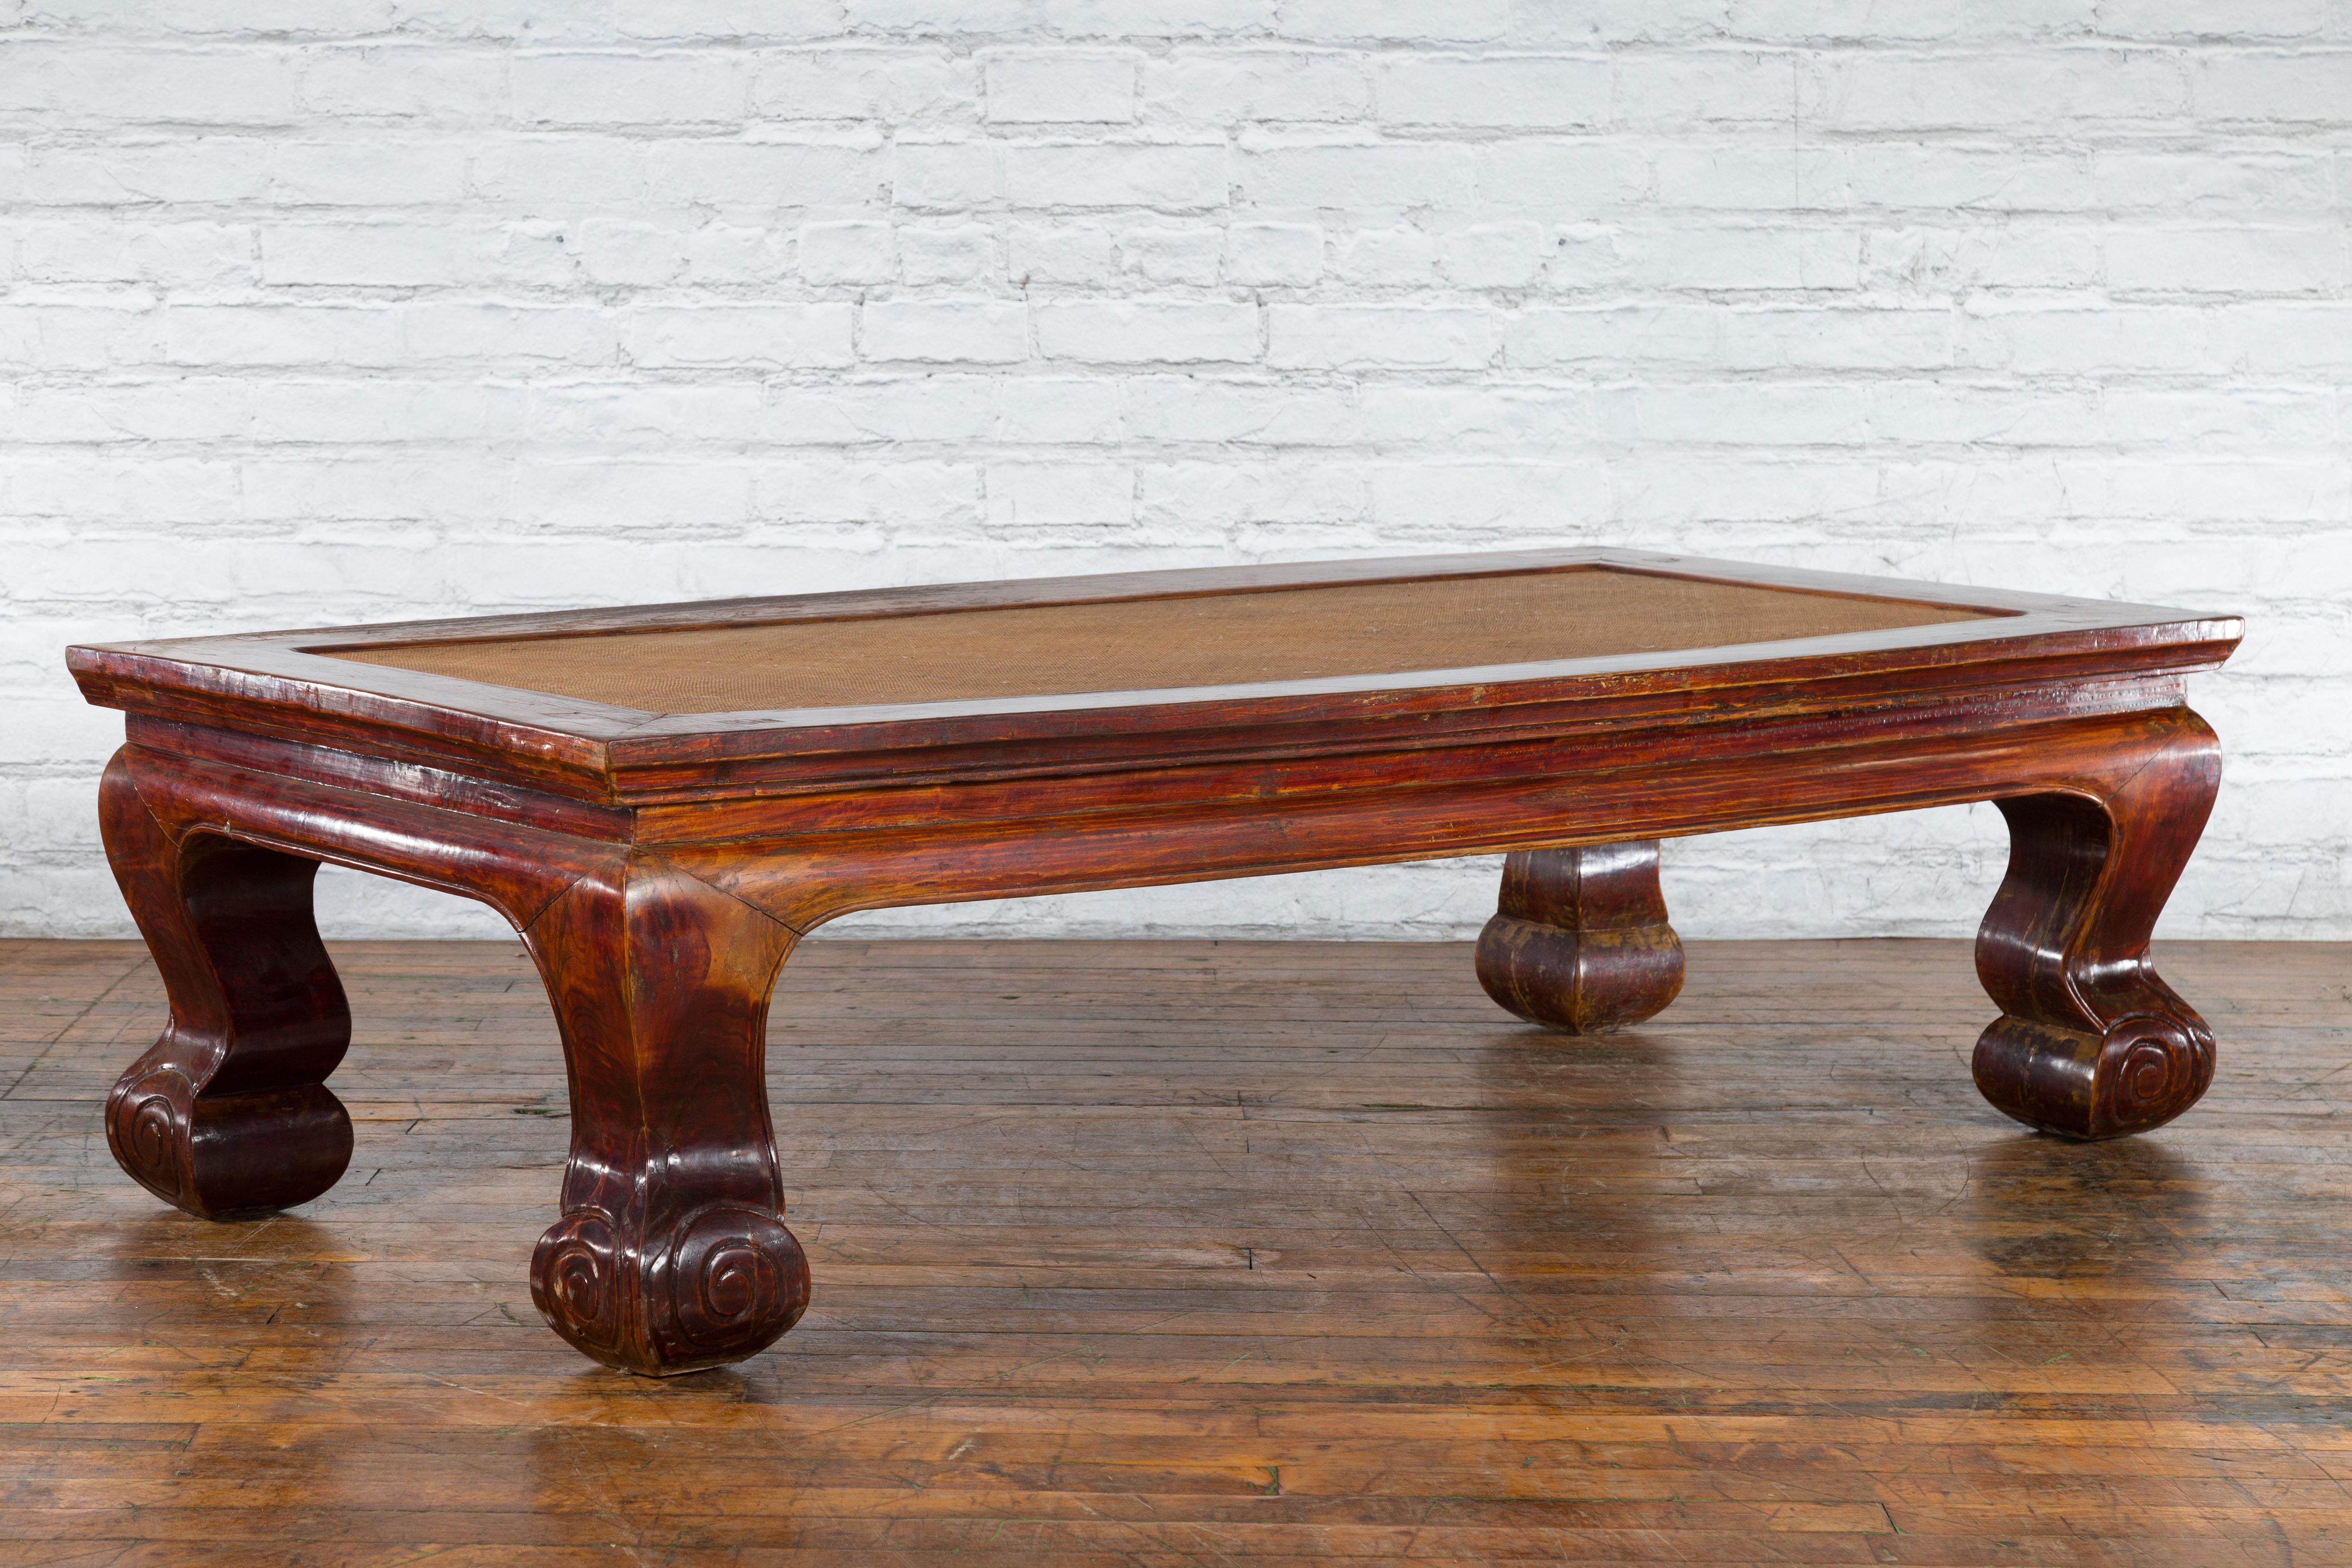 Chinese Qing Dynasty Period 19th Century Elm Coffee Table with Rattan Top For Sale 1